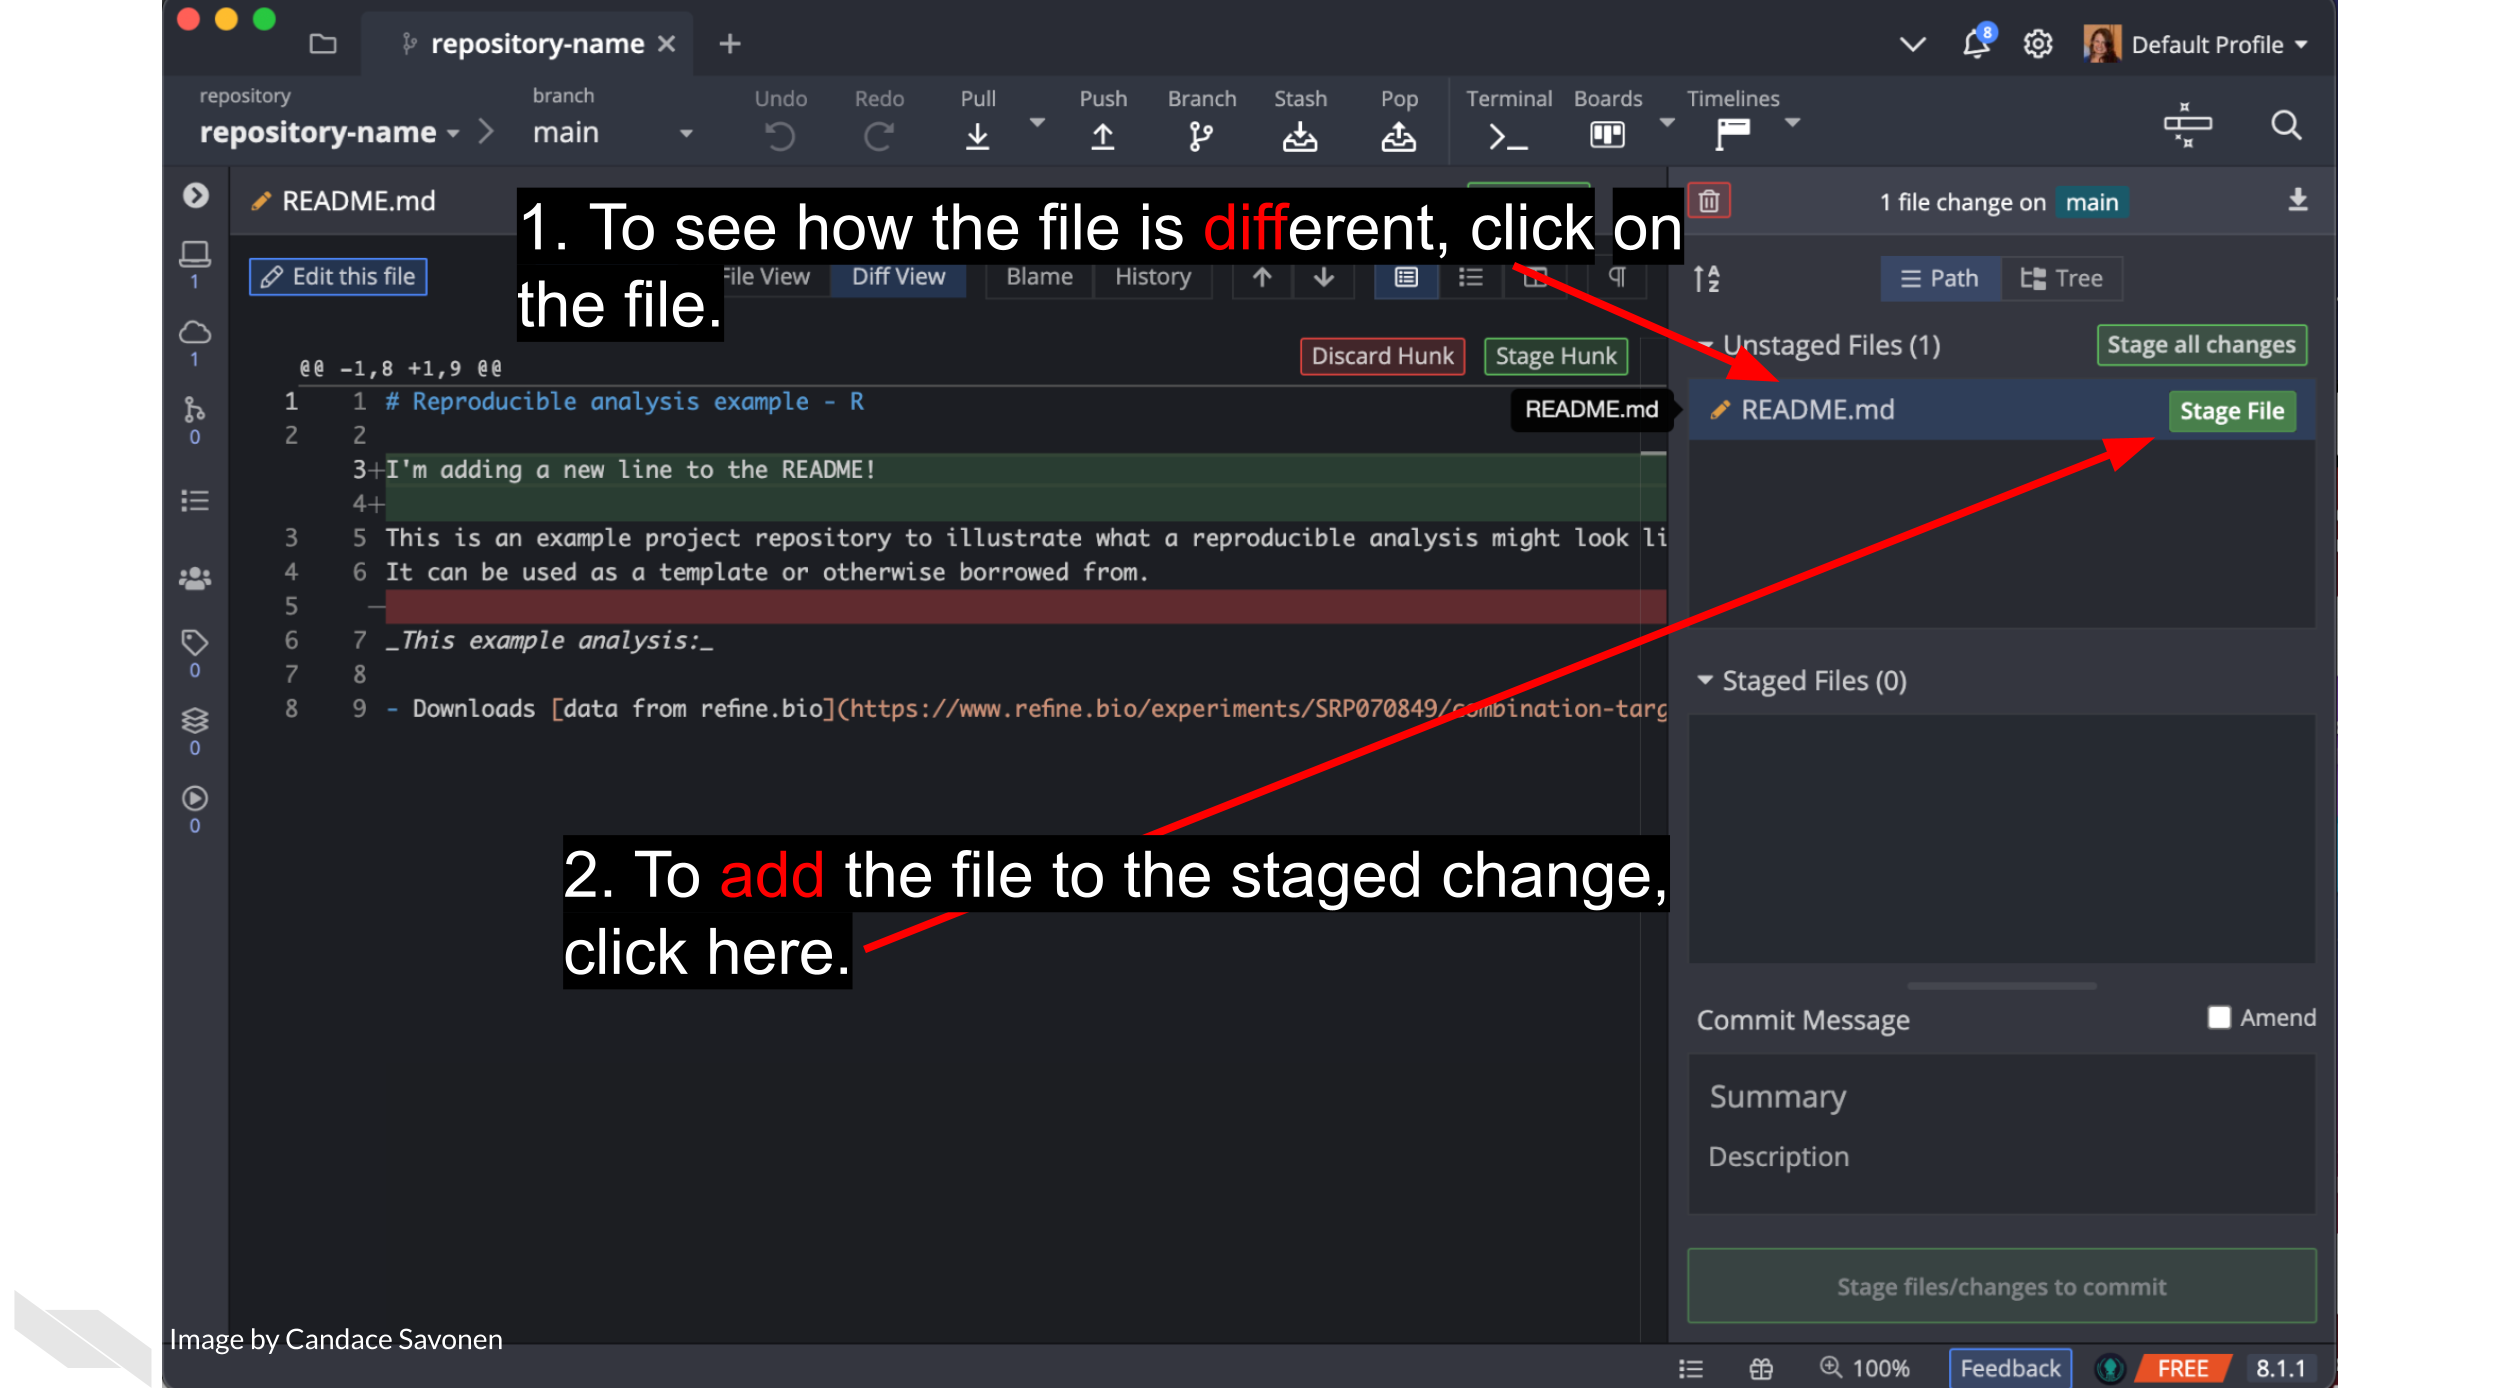 To see how the file is different, click on the filename in the right side of the GitKraken screen. To add the file to the staged change, click on the Stage File button. 